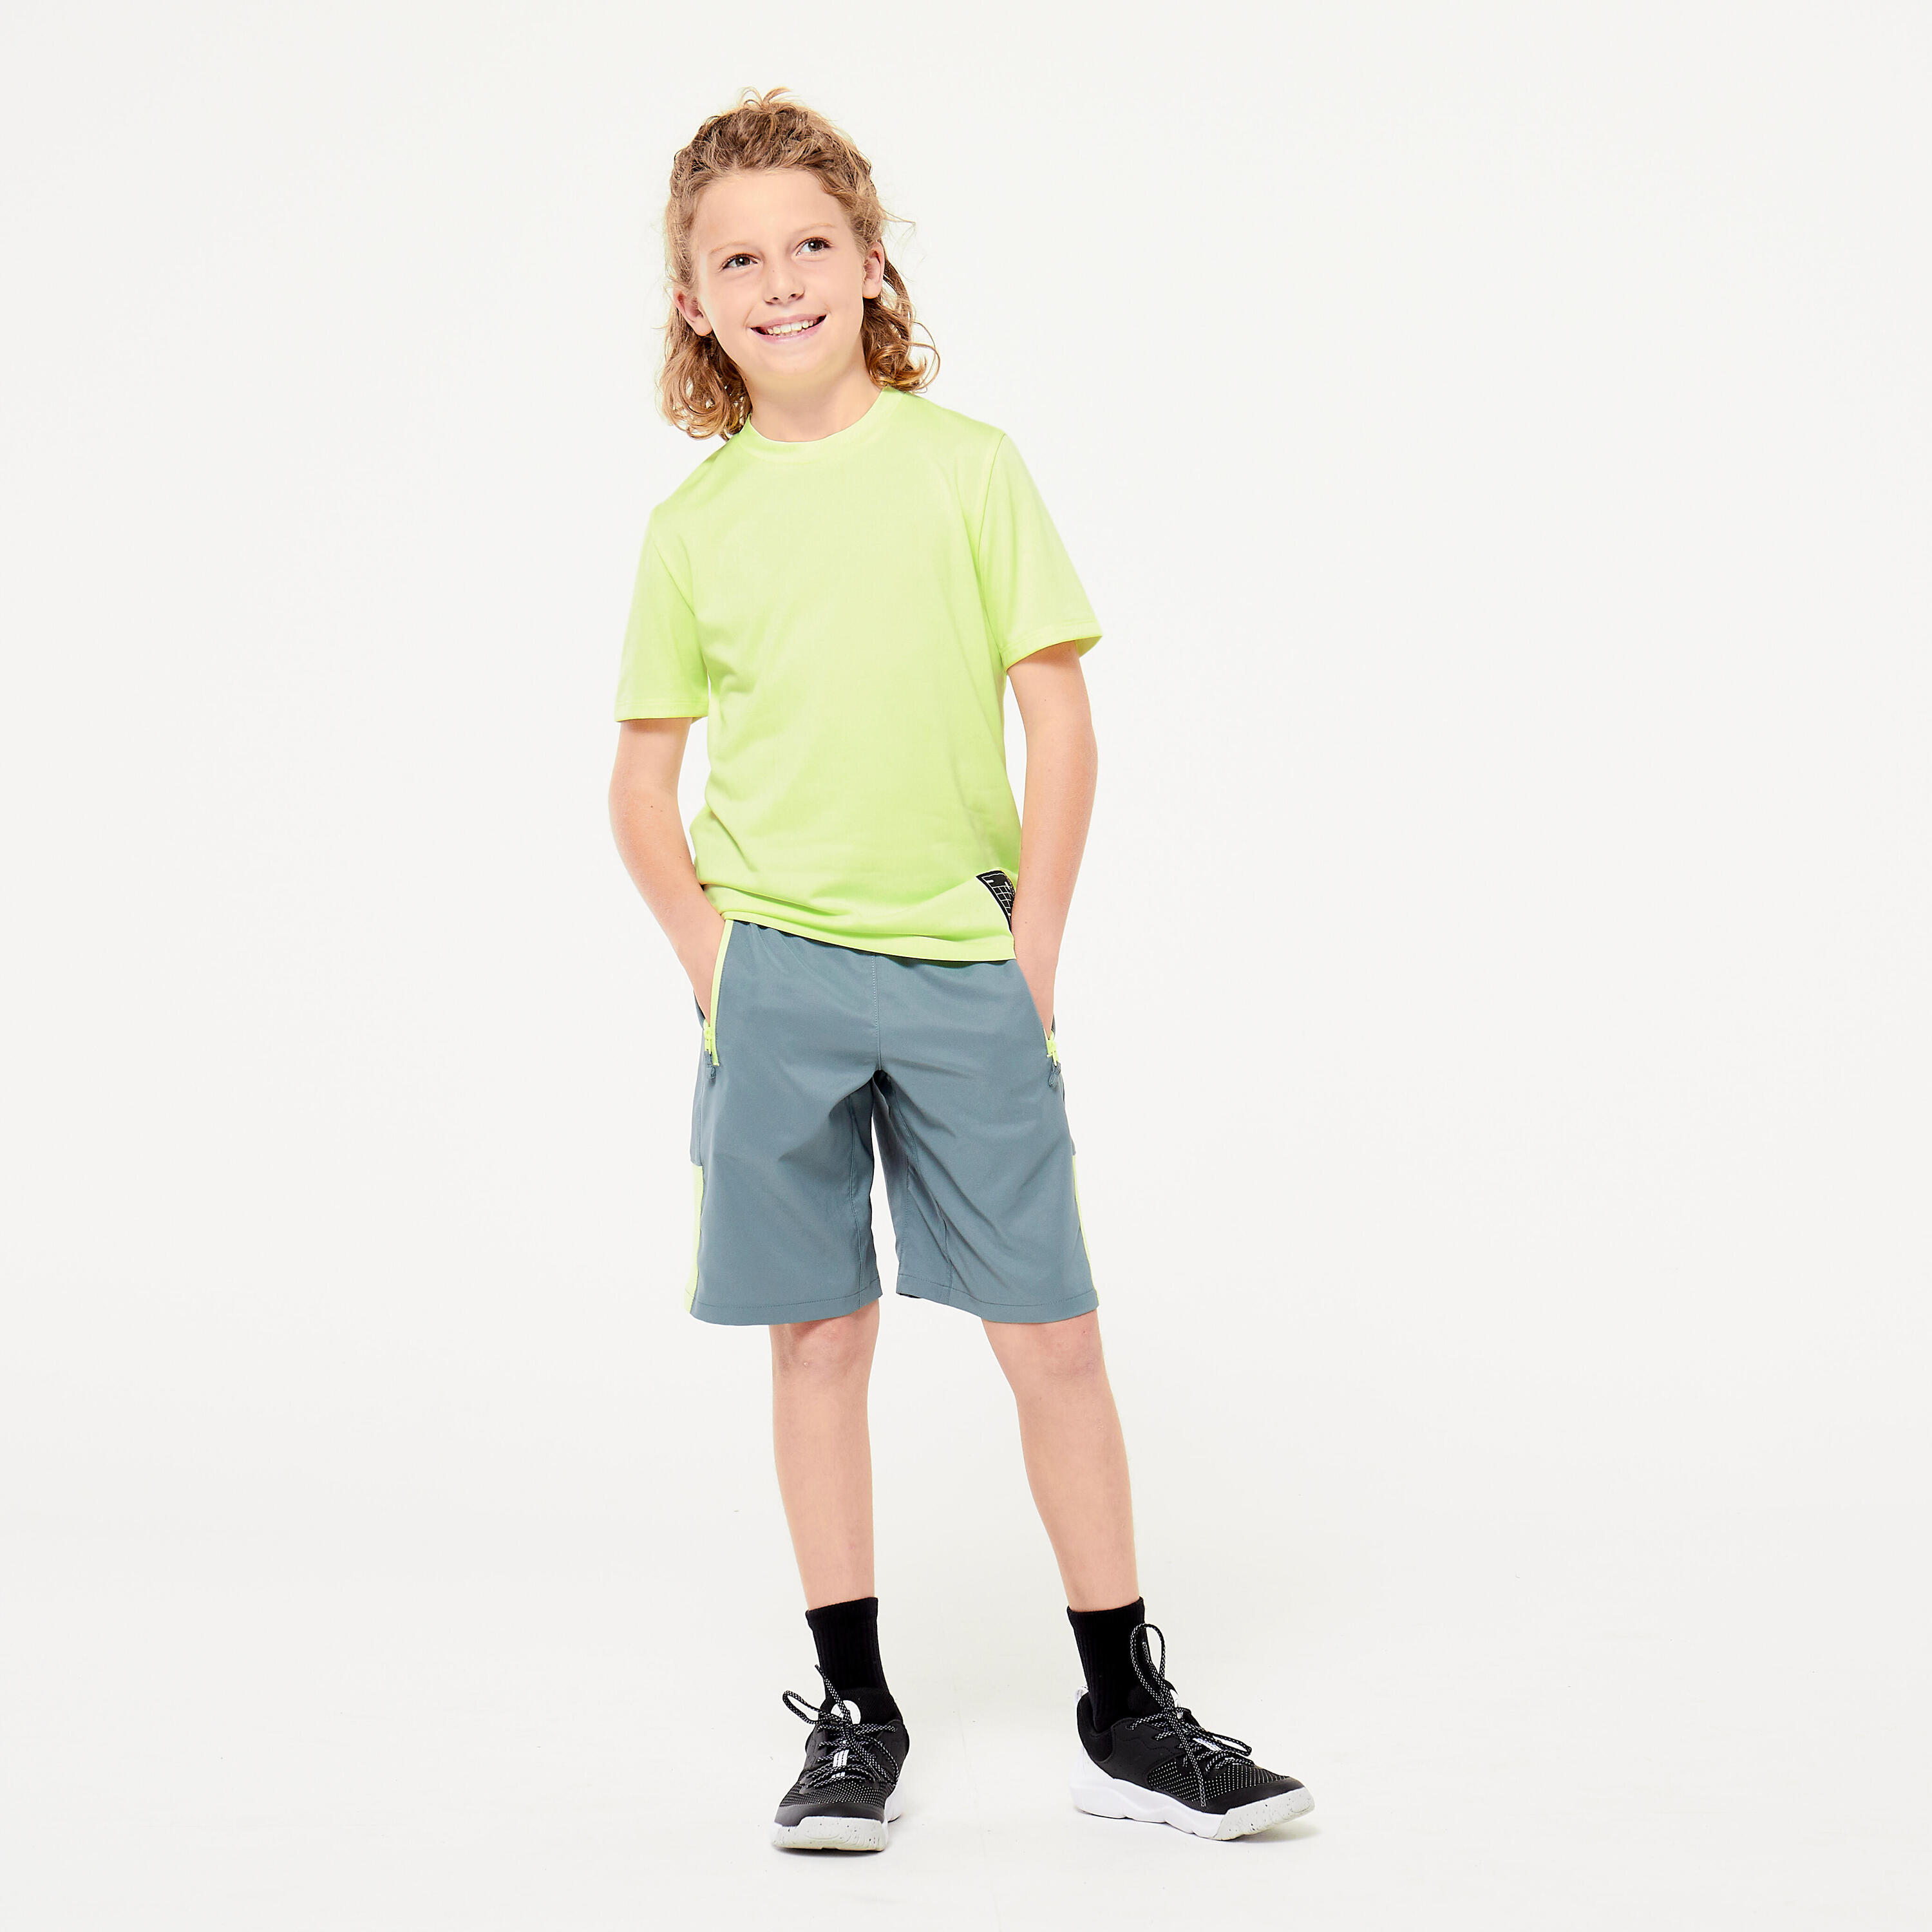 Kids' Breathable T-Shirt - Yellow 2/4